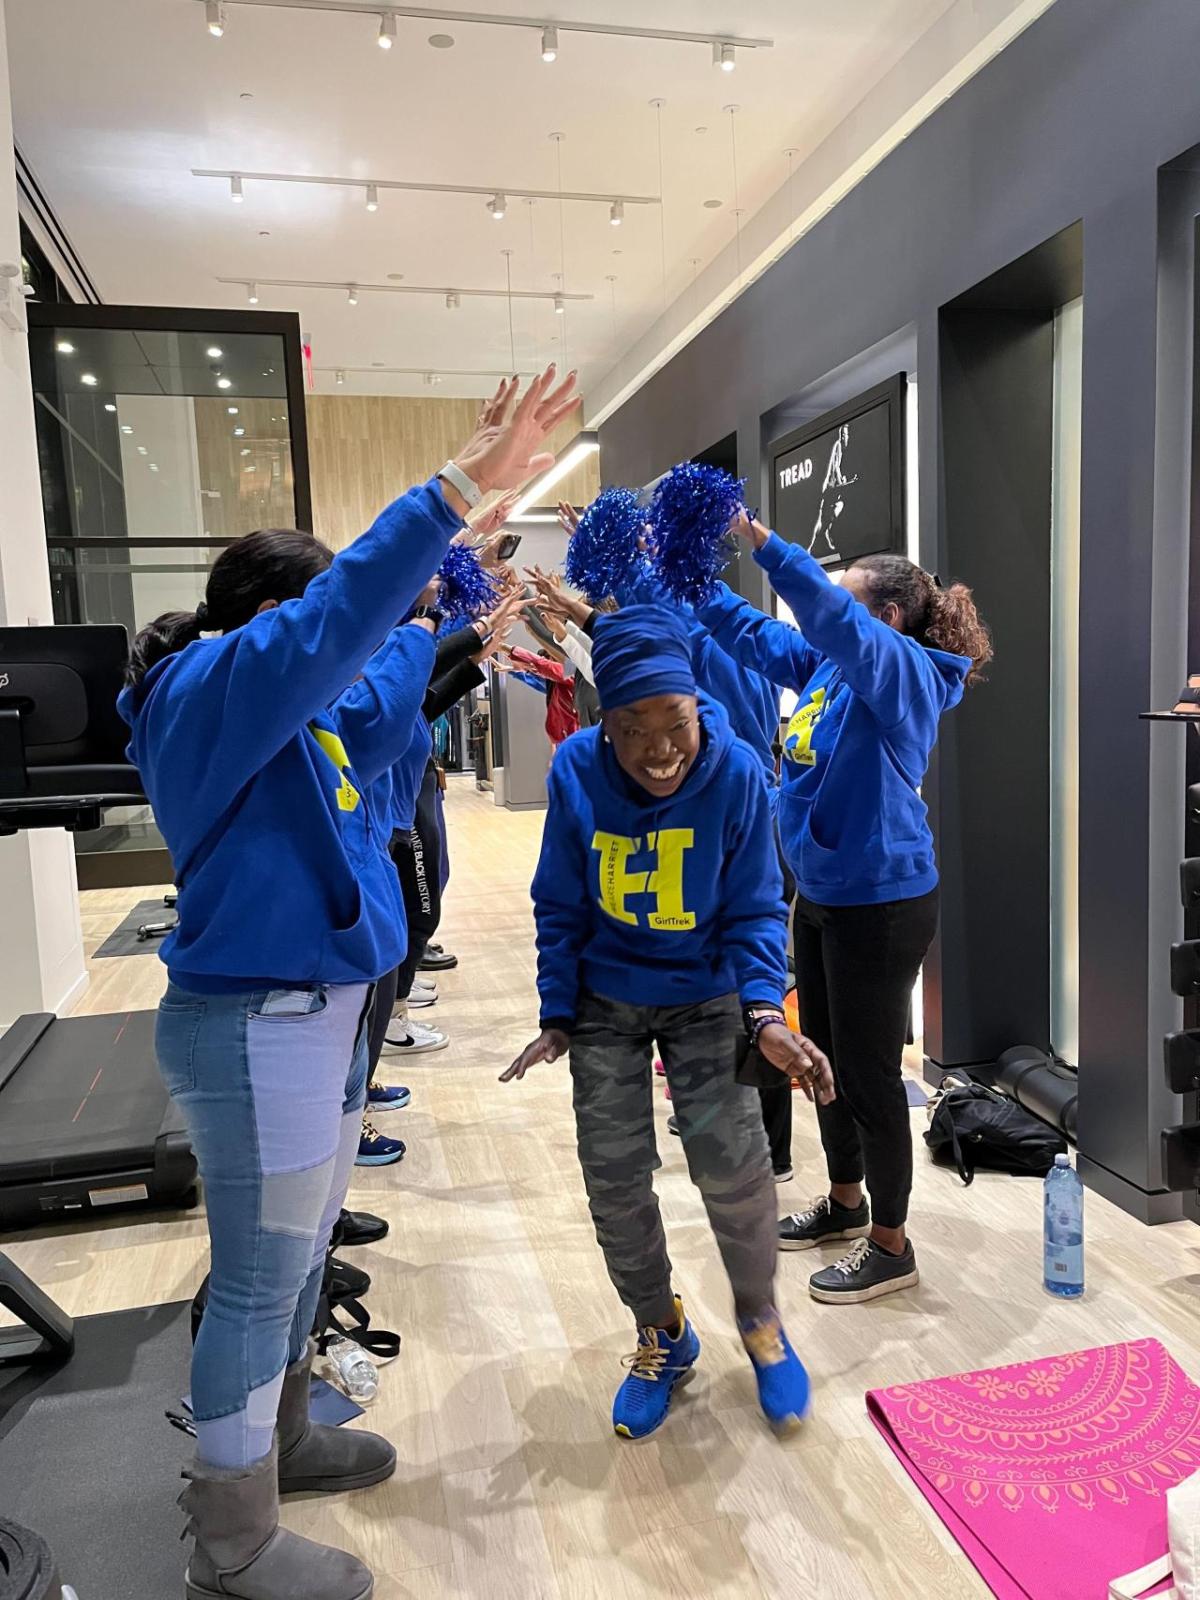 Women in blue sweatshirts holding hands up to create a tunnel for another woman in a blue sweatshirt with a yellow "H" on it to walk through